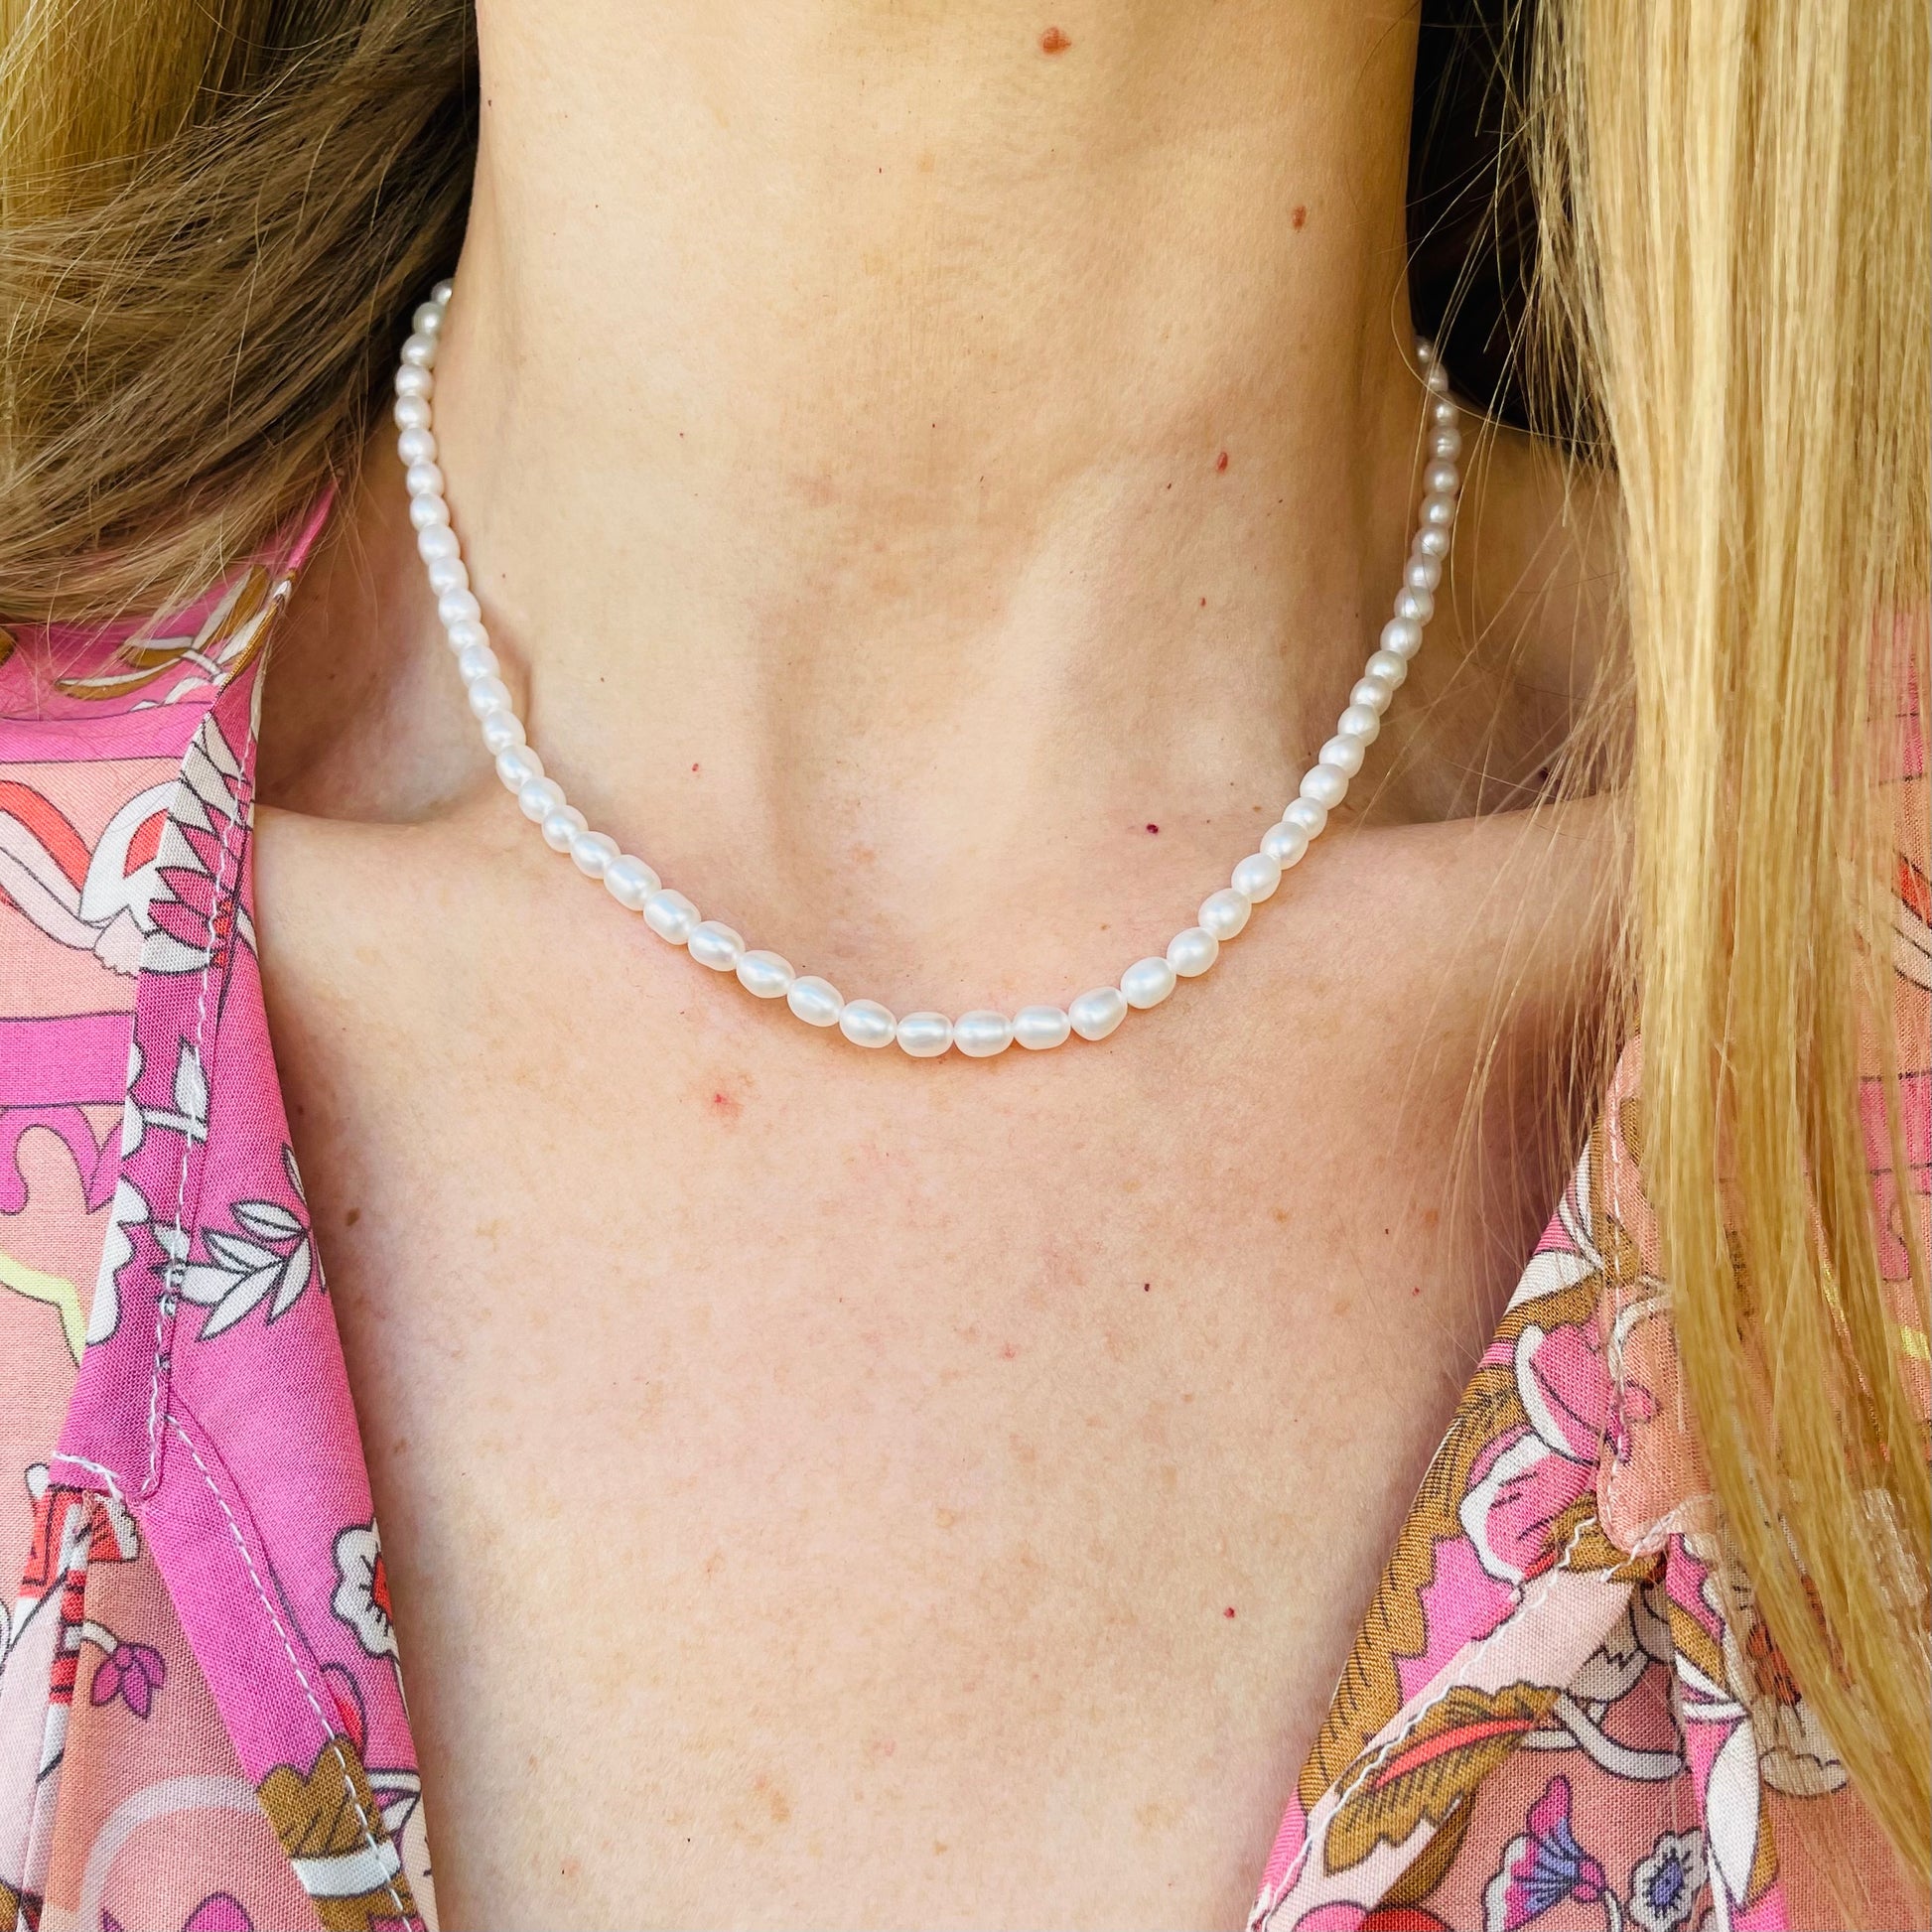 Sunshine Cultured Freshwater Pearl Necklace | 5-6mm - John Ross Jewellers